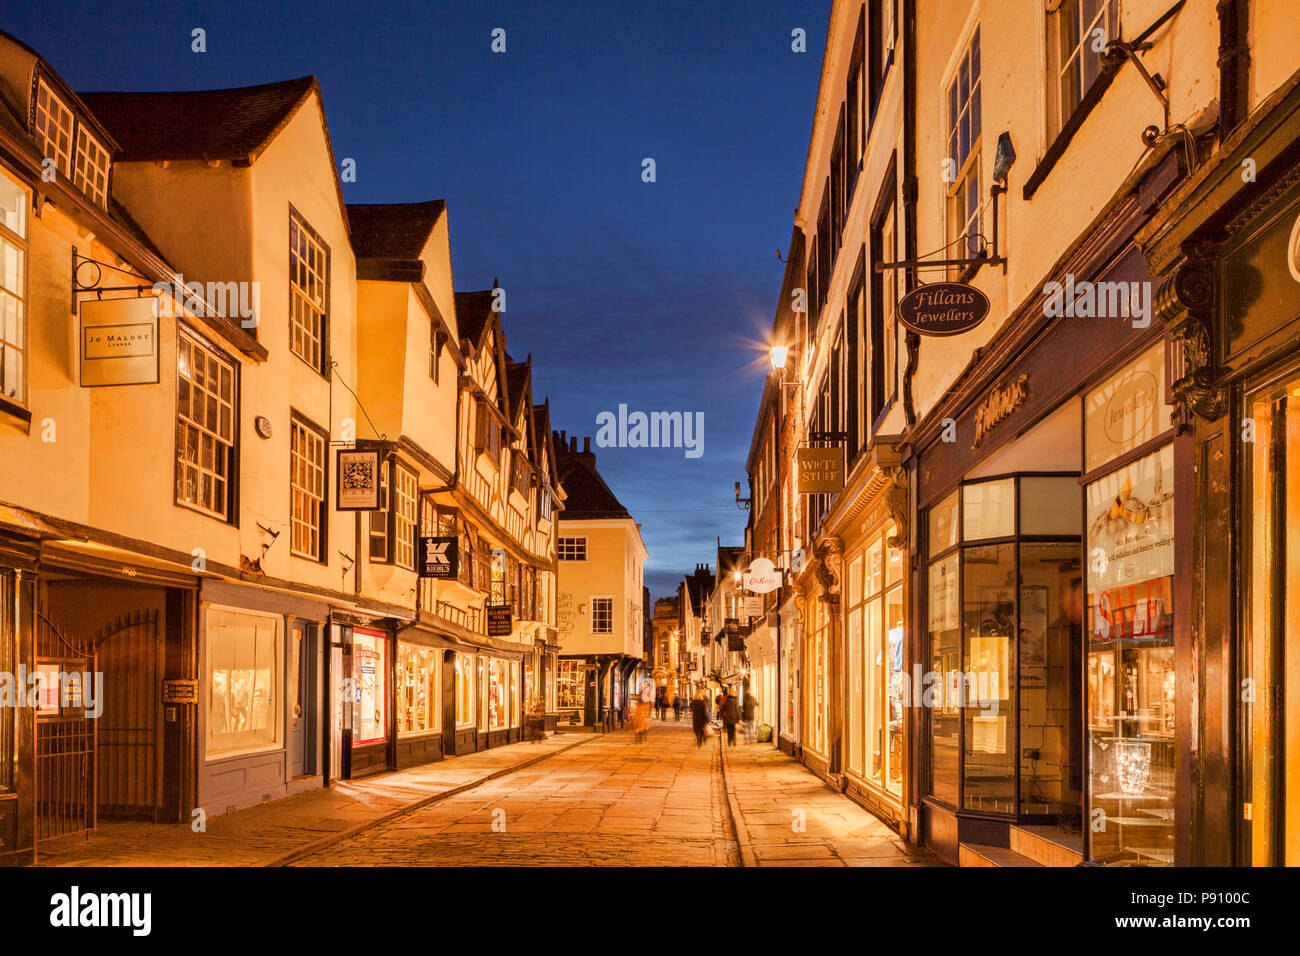 Twilight in  Stonegate, York, North Yorkshire, England, UK. Shoppers slightly motion blurred due to long exposure. Stock Photo